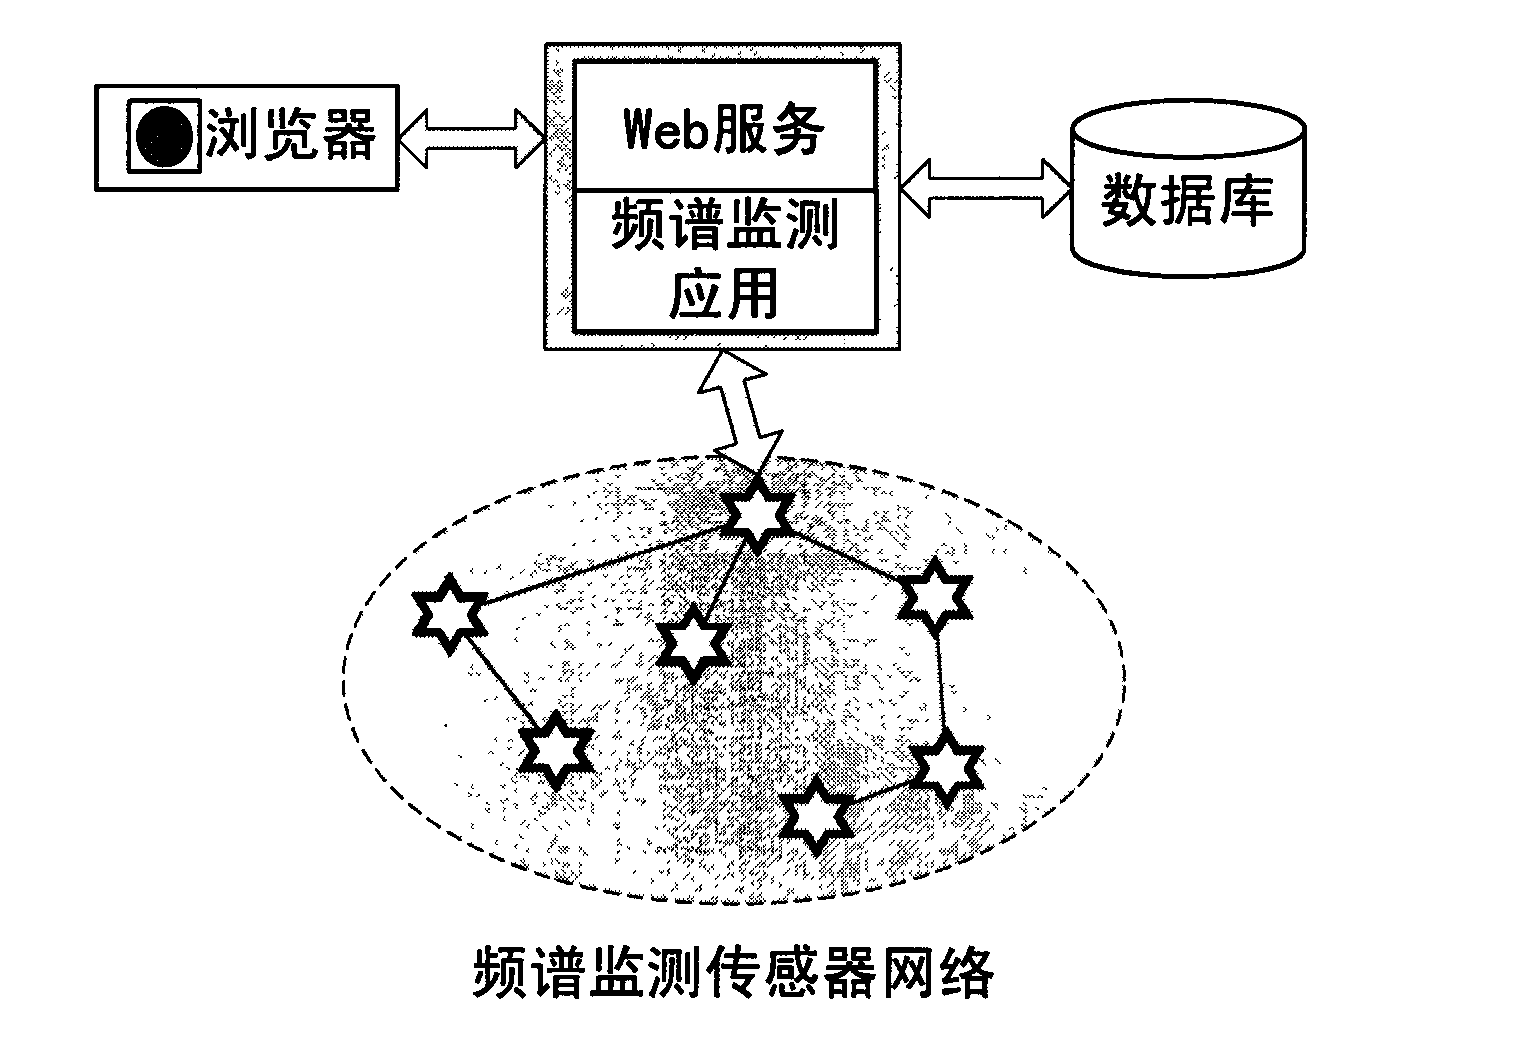 Wireless sensor network frequency spectrum monitoring and displaying method based on browser/server software architecture